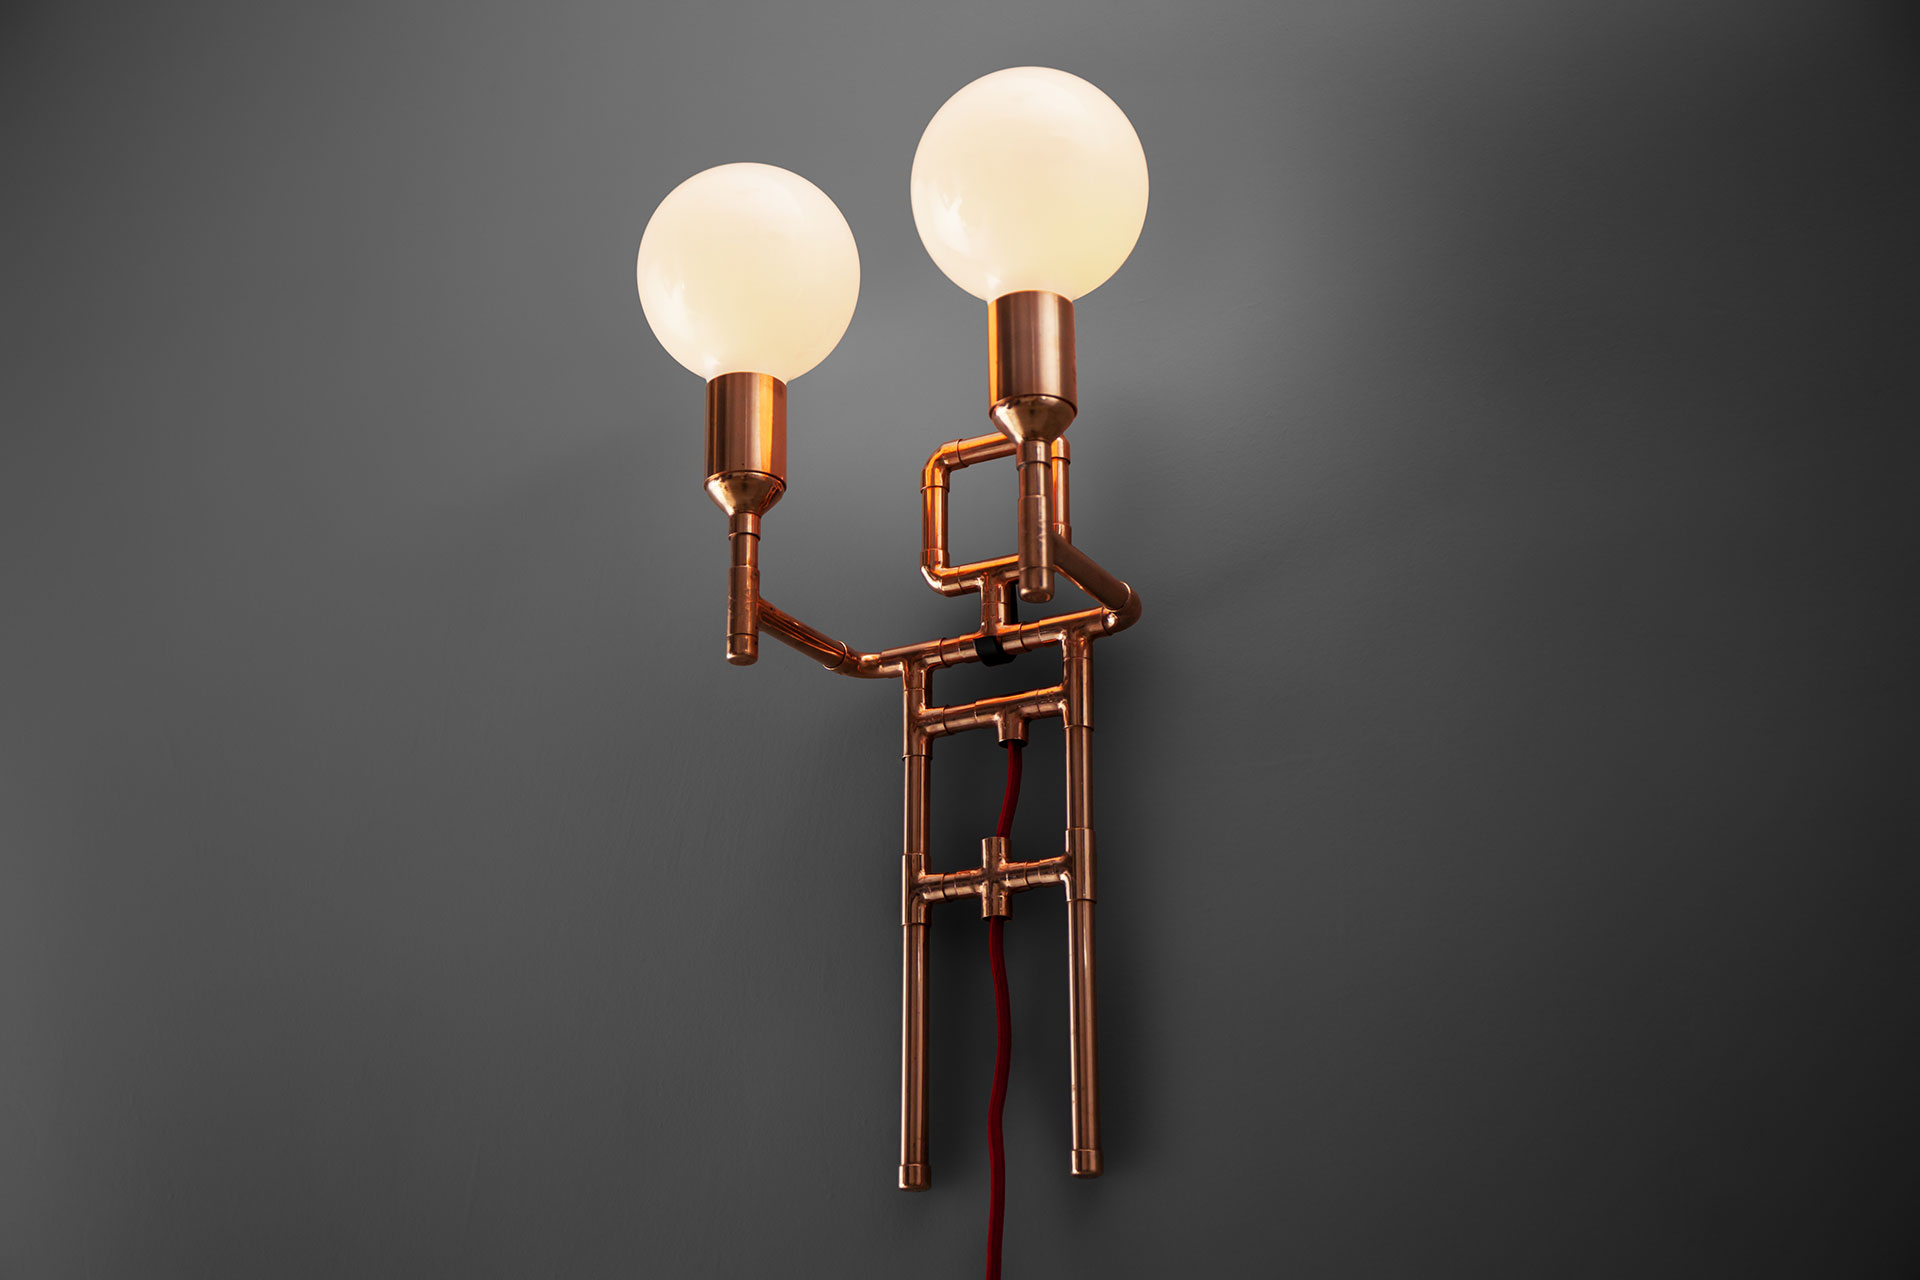 Cool designers sconce in copper or brass